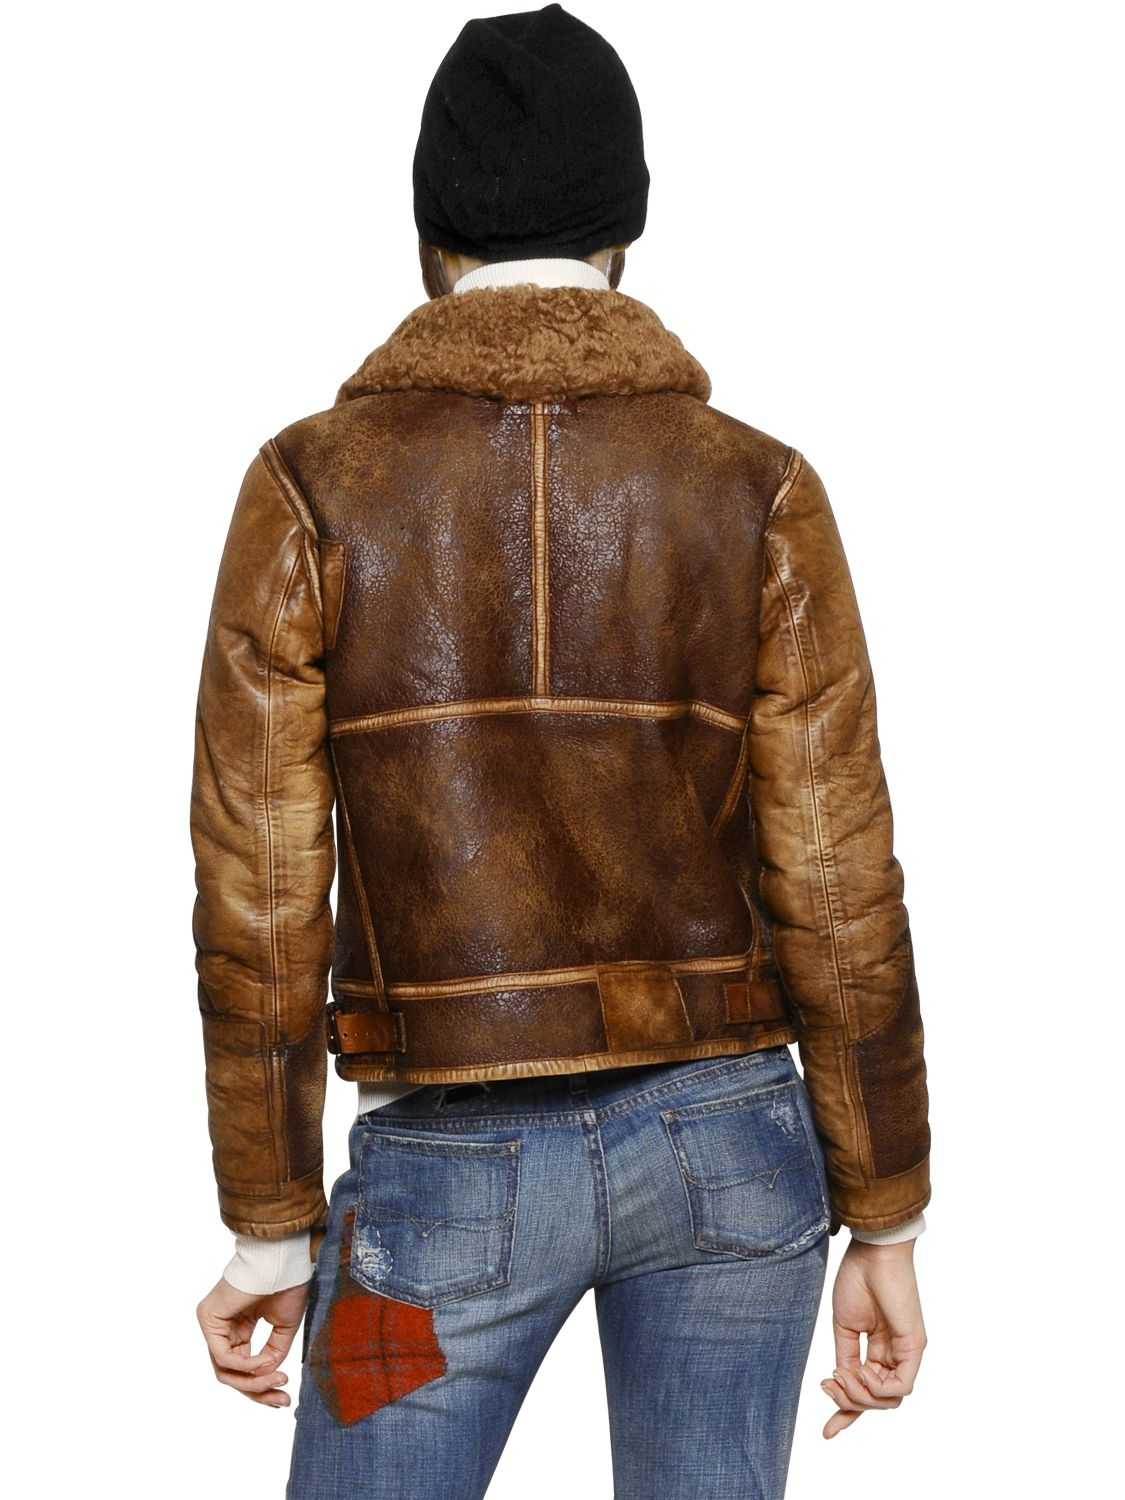 Polo Ralph Lauren Shearling Leather Jacket in Tan (Brown) - Lyst